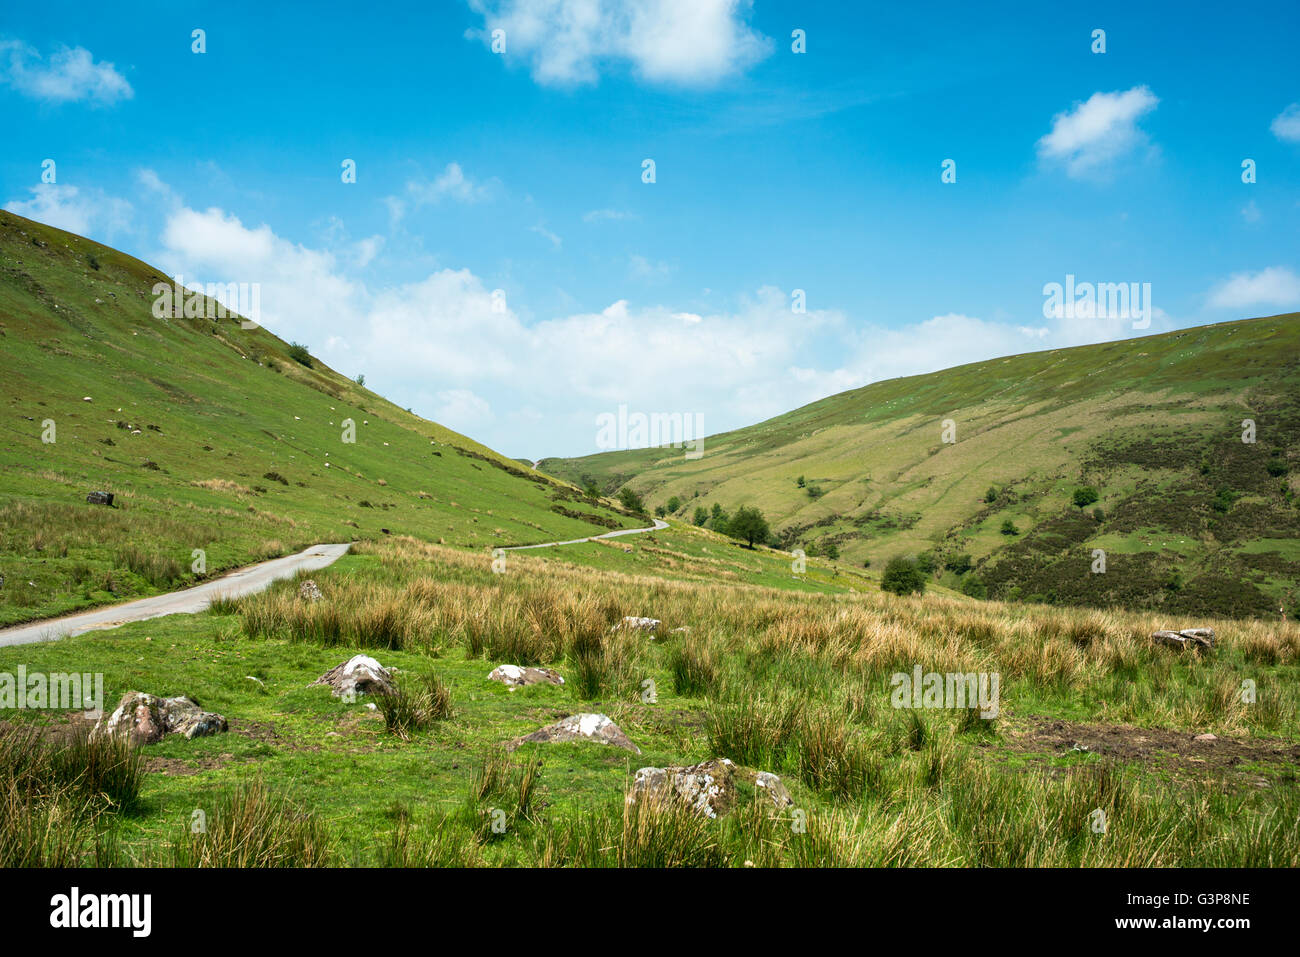 A road running through a valley betwenn two mountains. Stock Photo